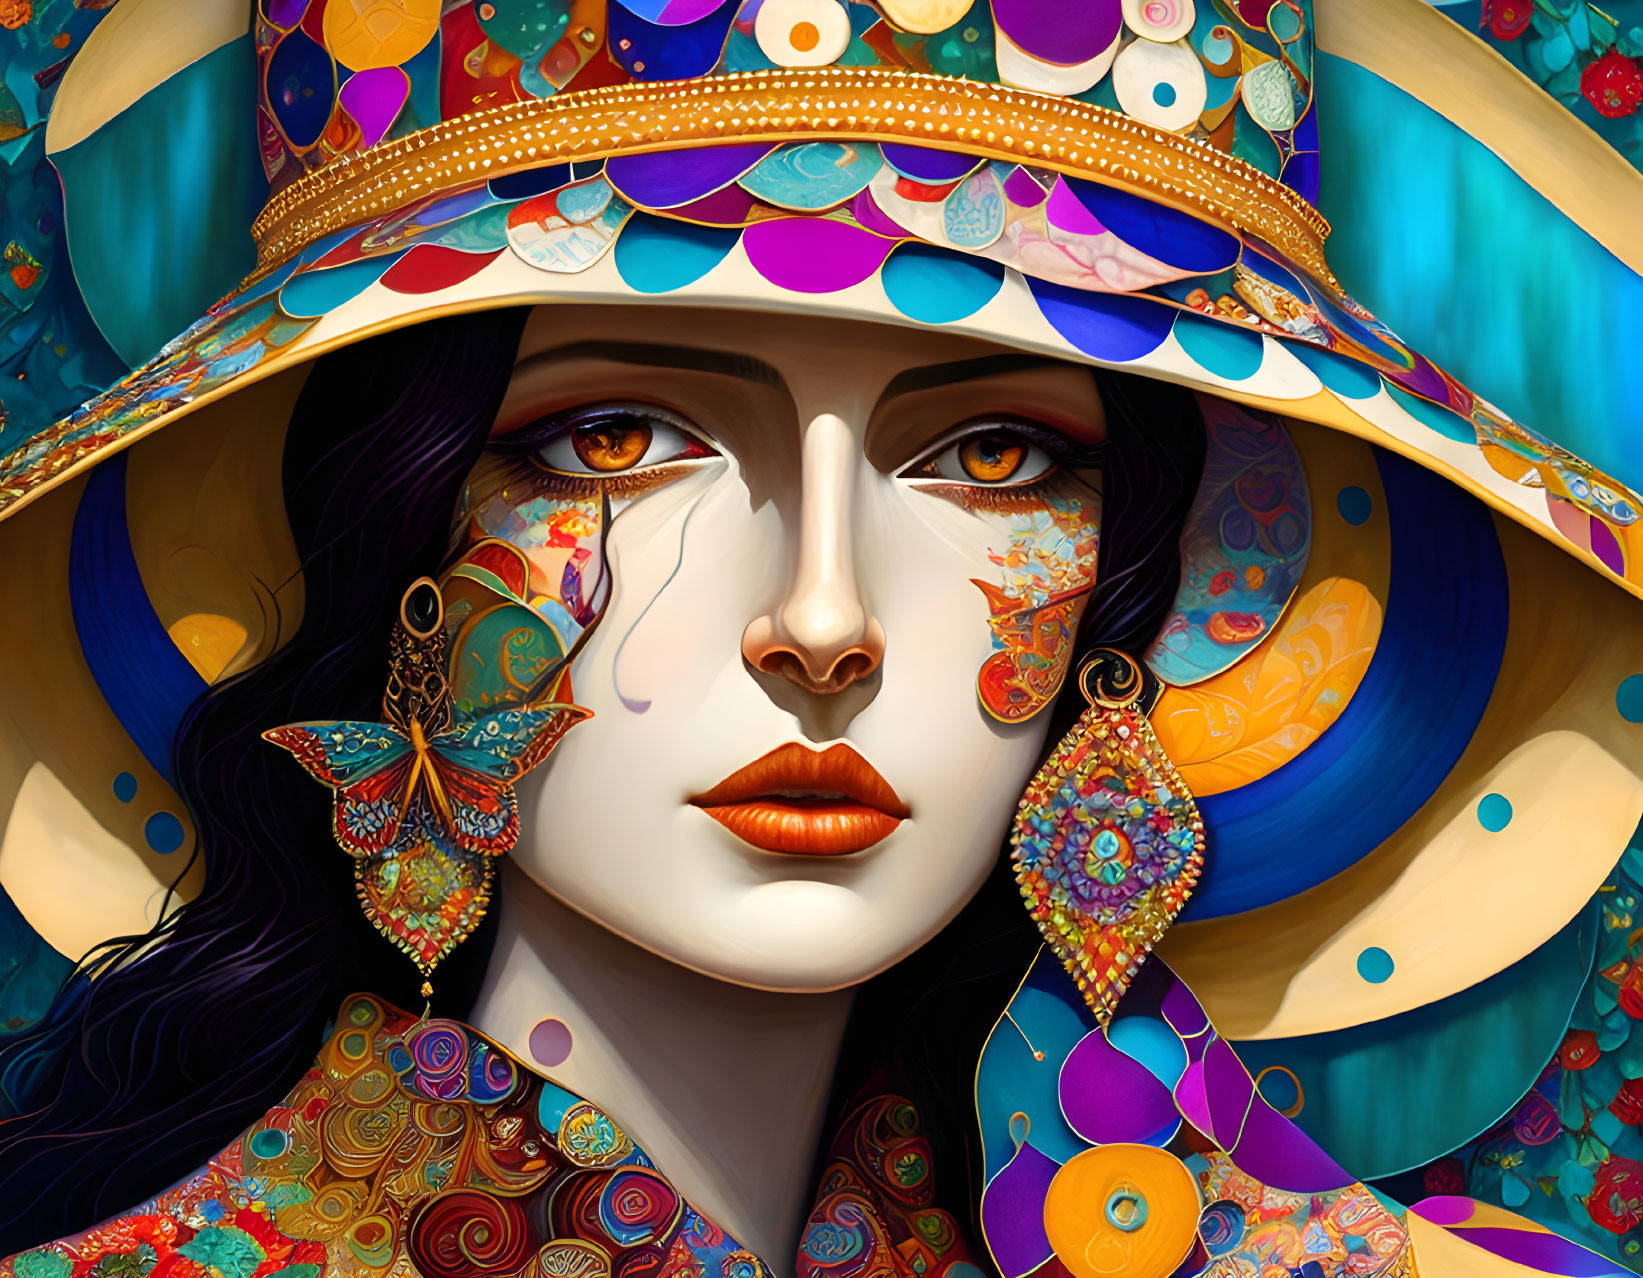 Colorful digital artwork of woman in wide-brimmed hat with butterfly patterns.